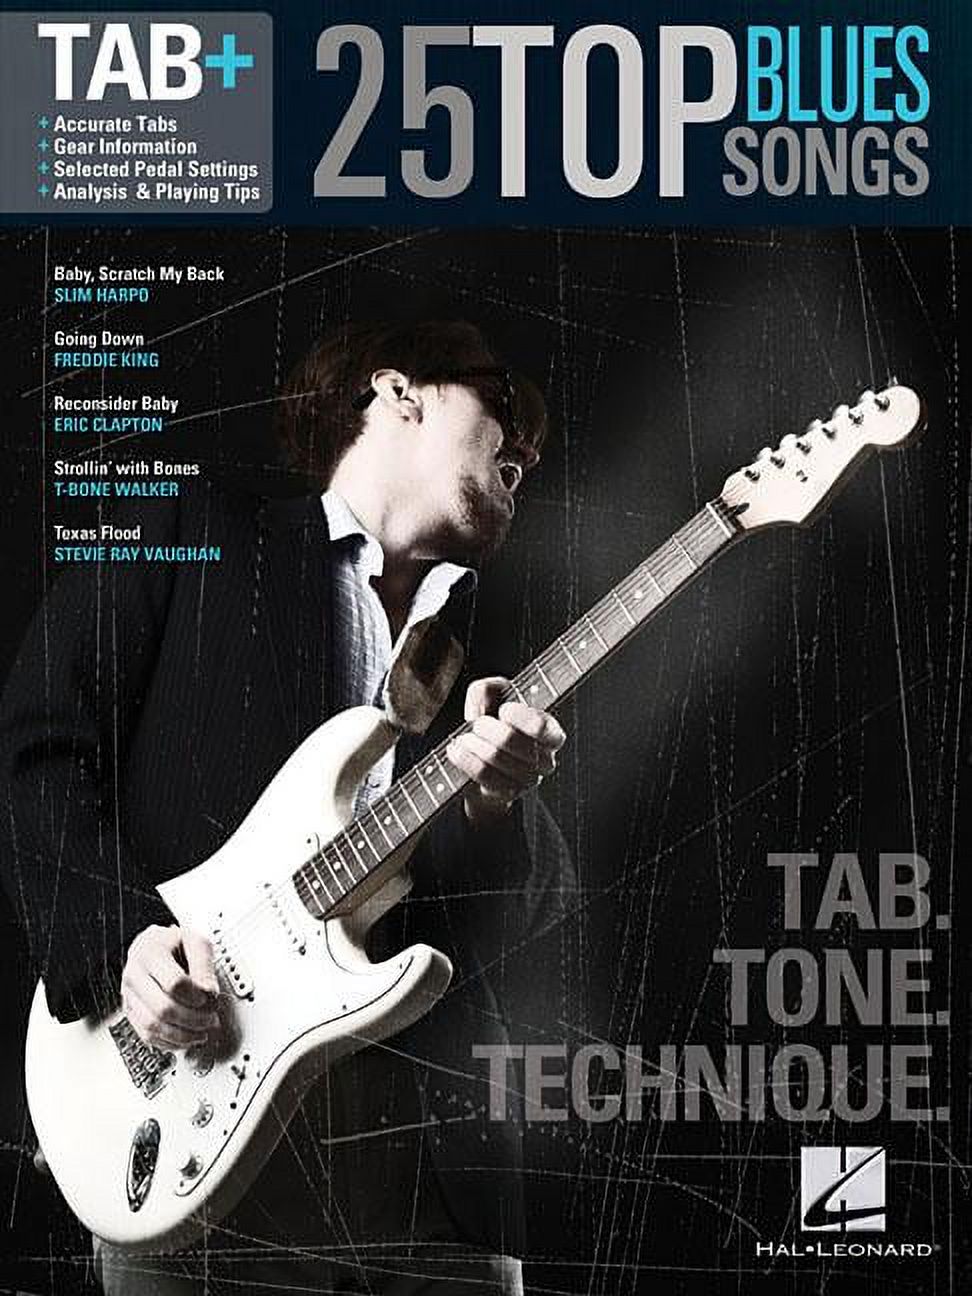 25 Top Blues Songs - Tab. Tone. Technique. : Tab+ (Paperback) - image 1 of 1